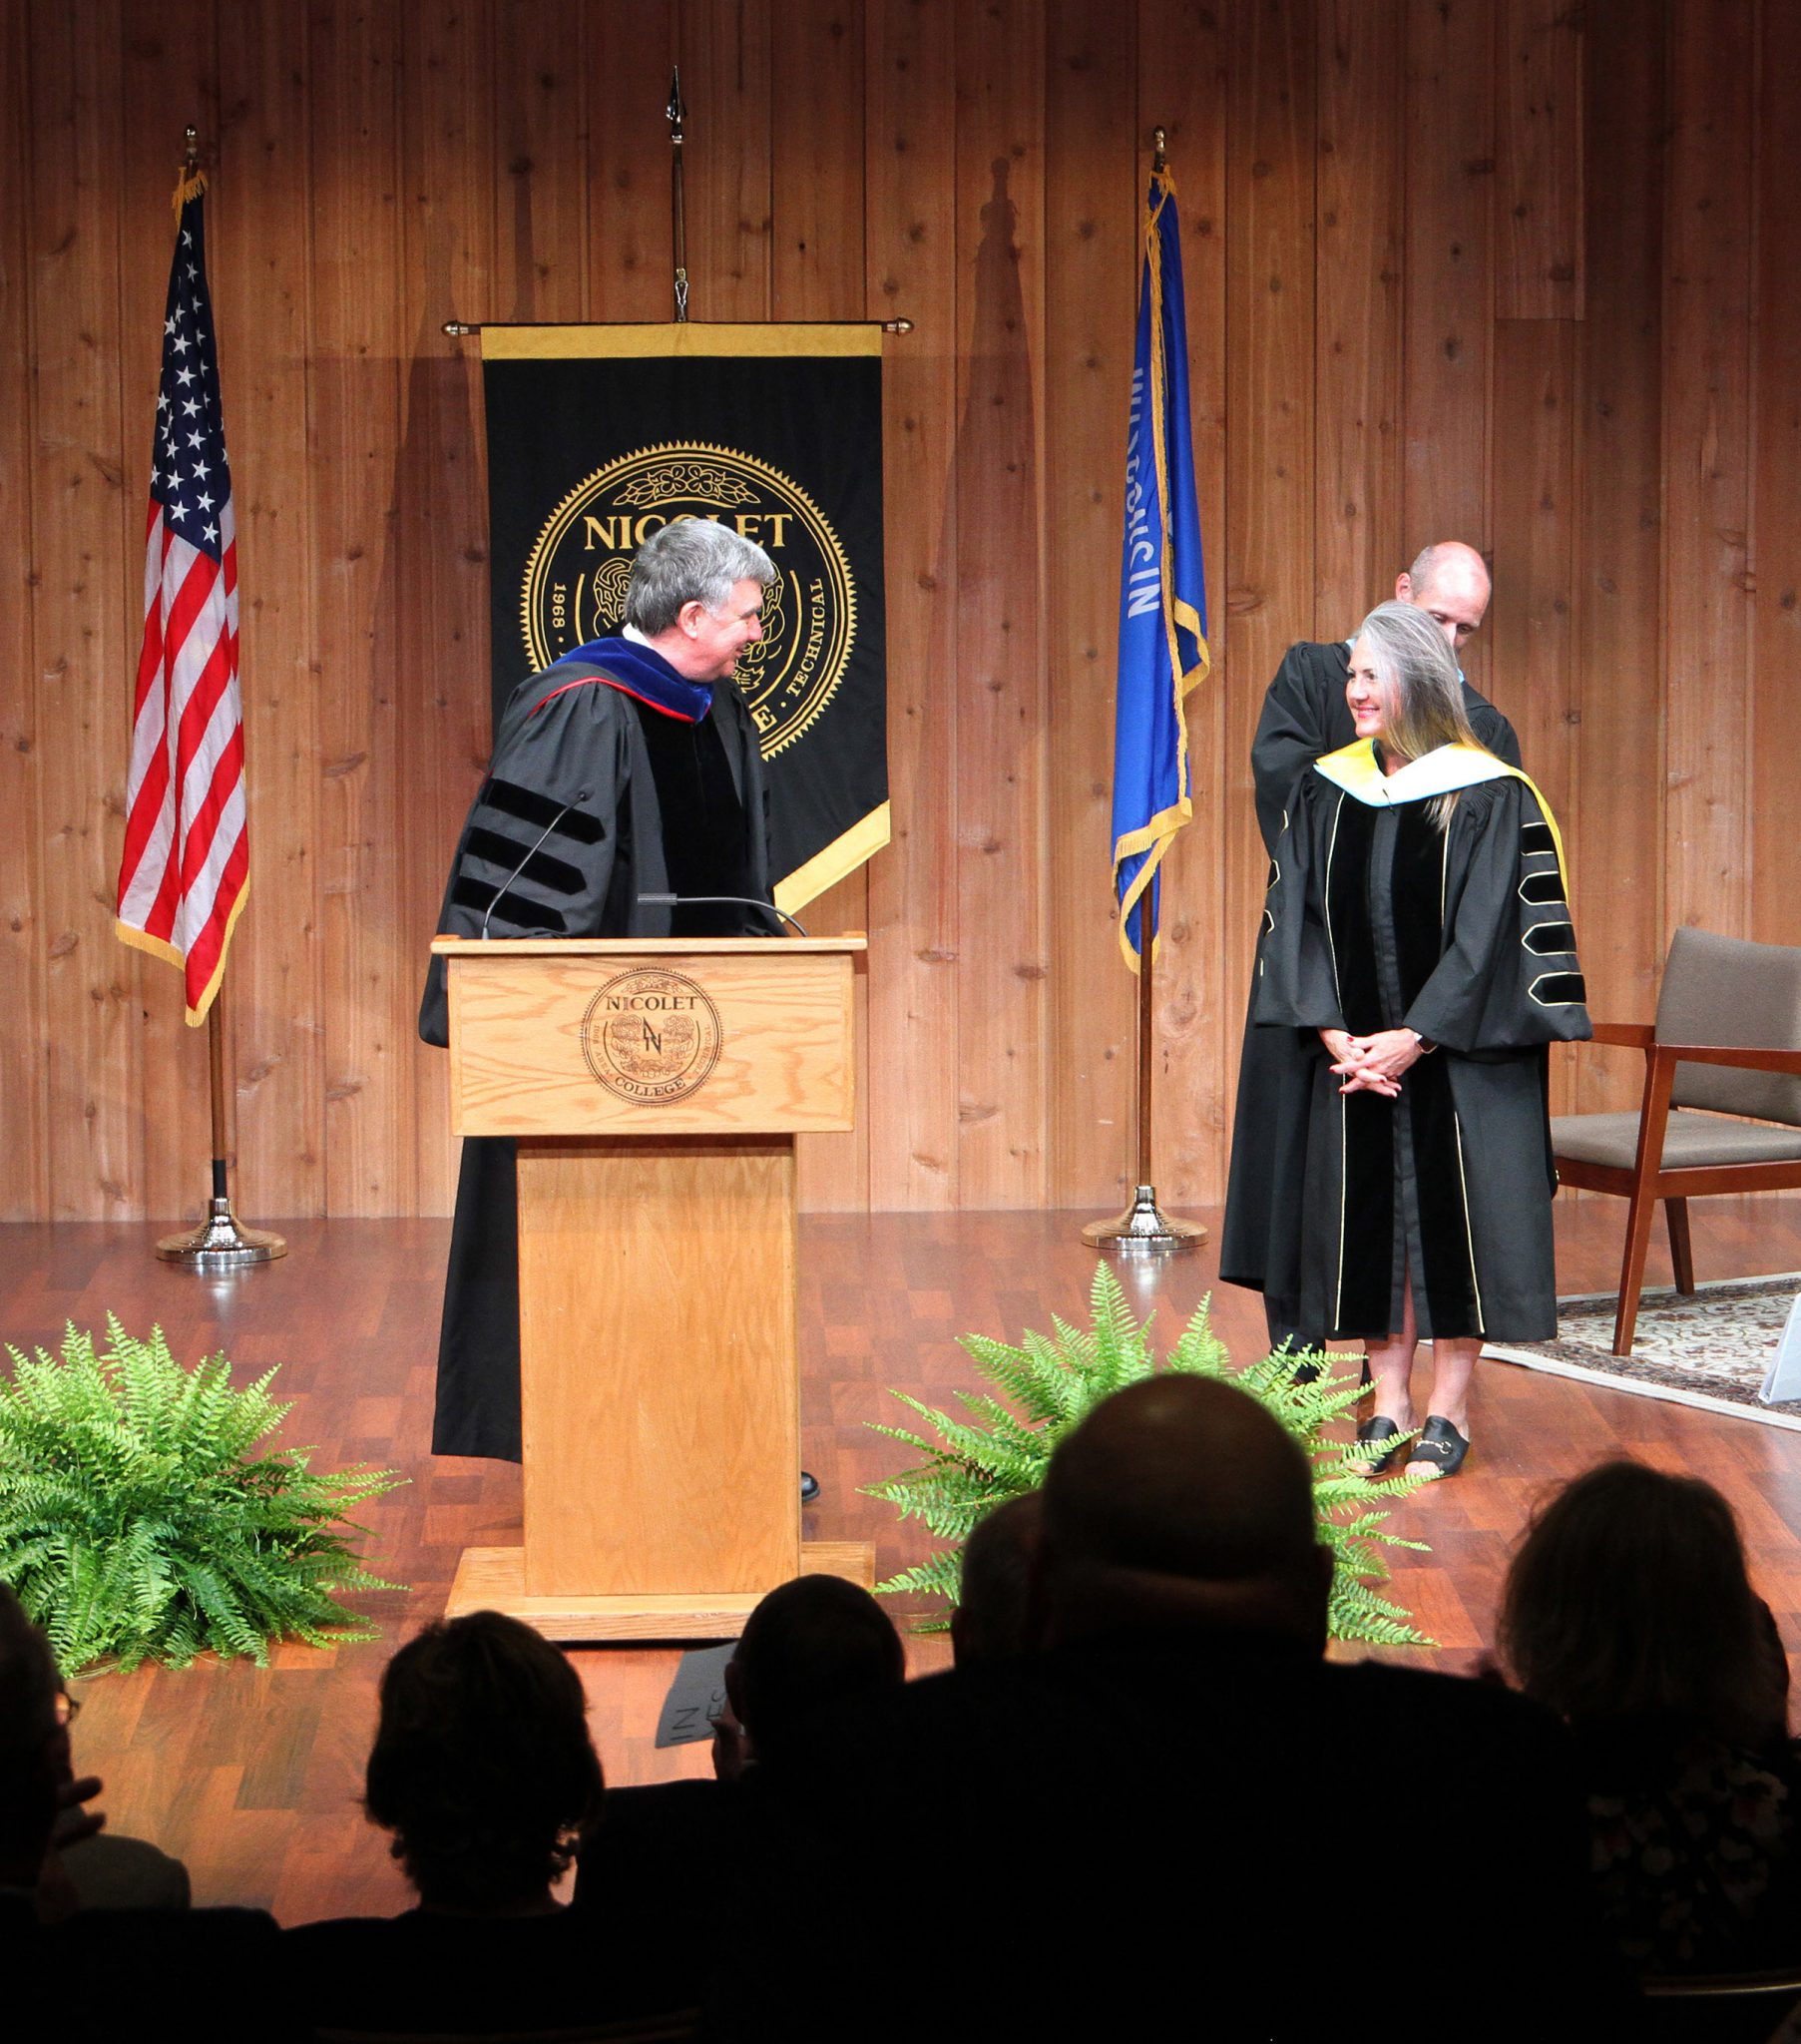 Kate Ferrel installed as next Nicolet College president at investiture ceremony 